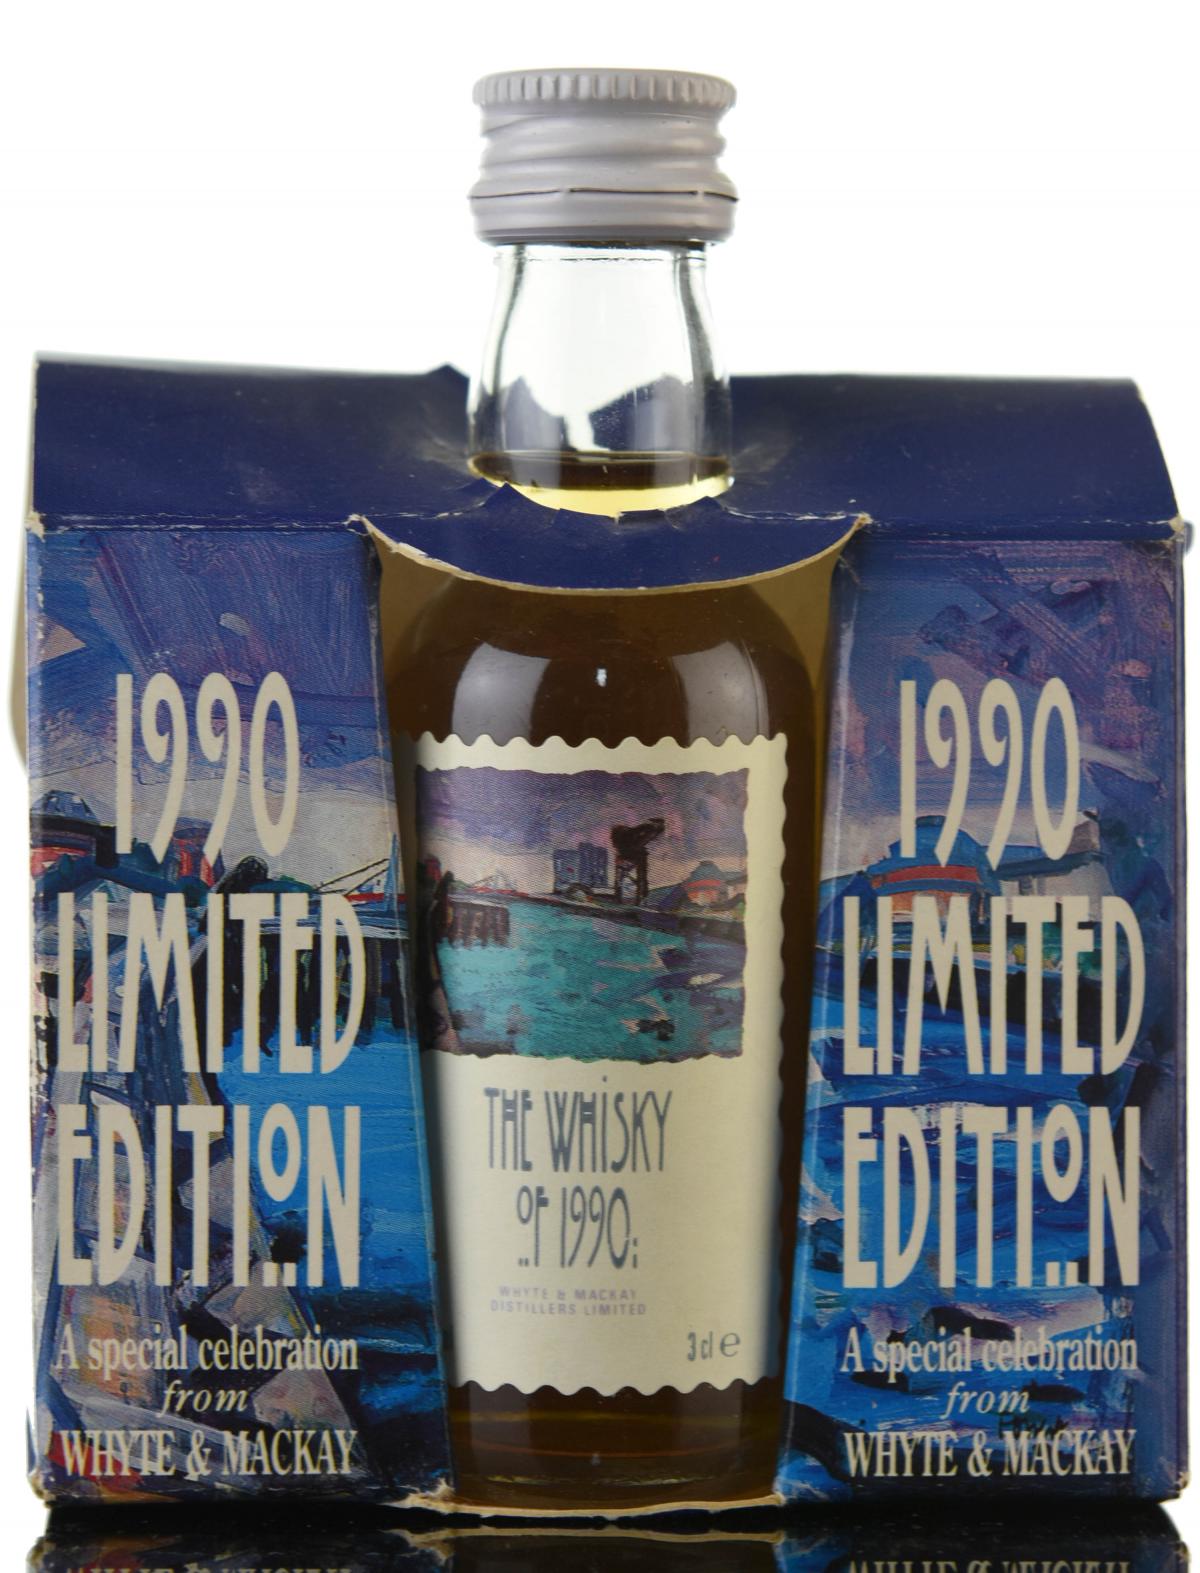 The Whisky Of 1990 Miniature